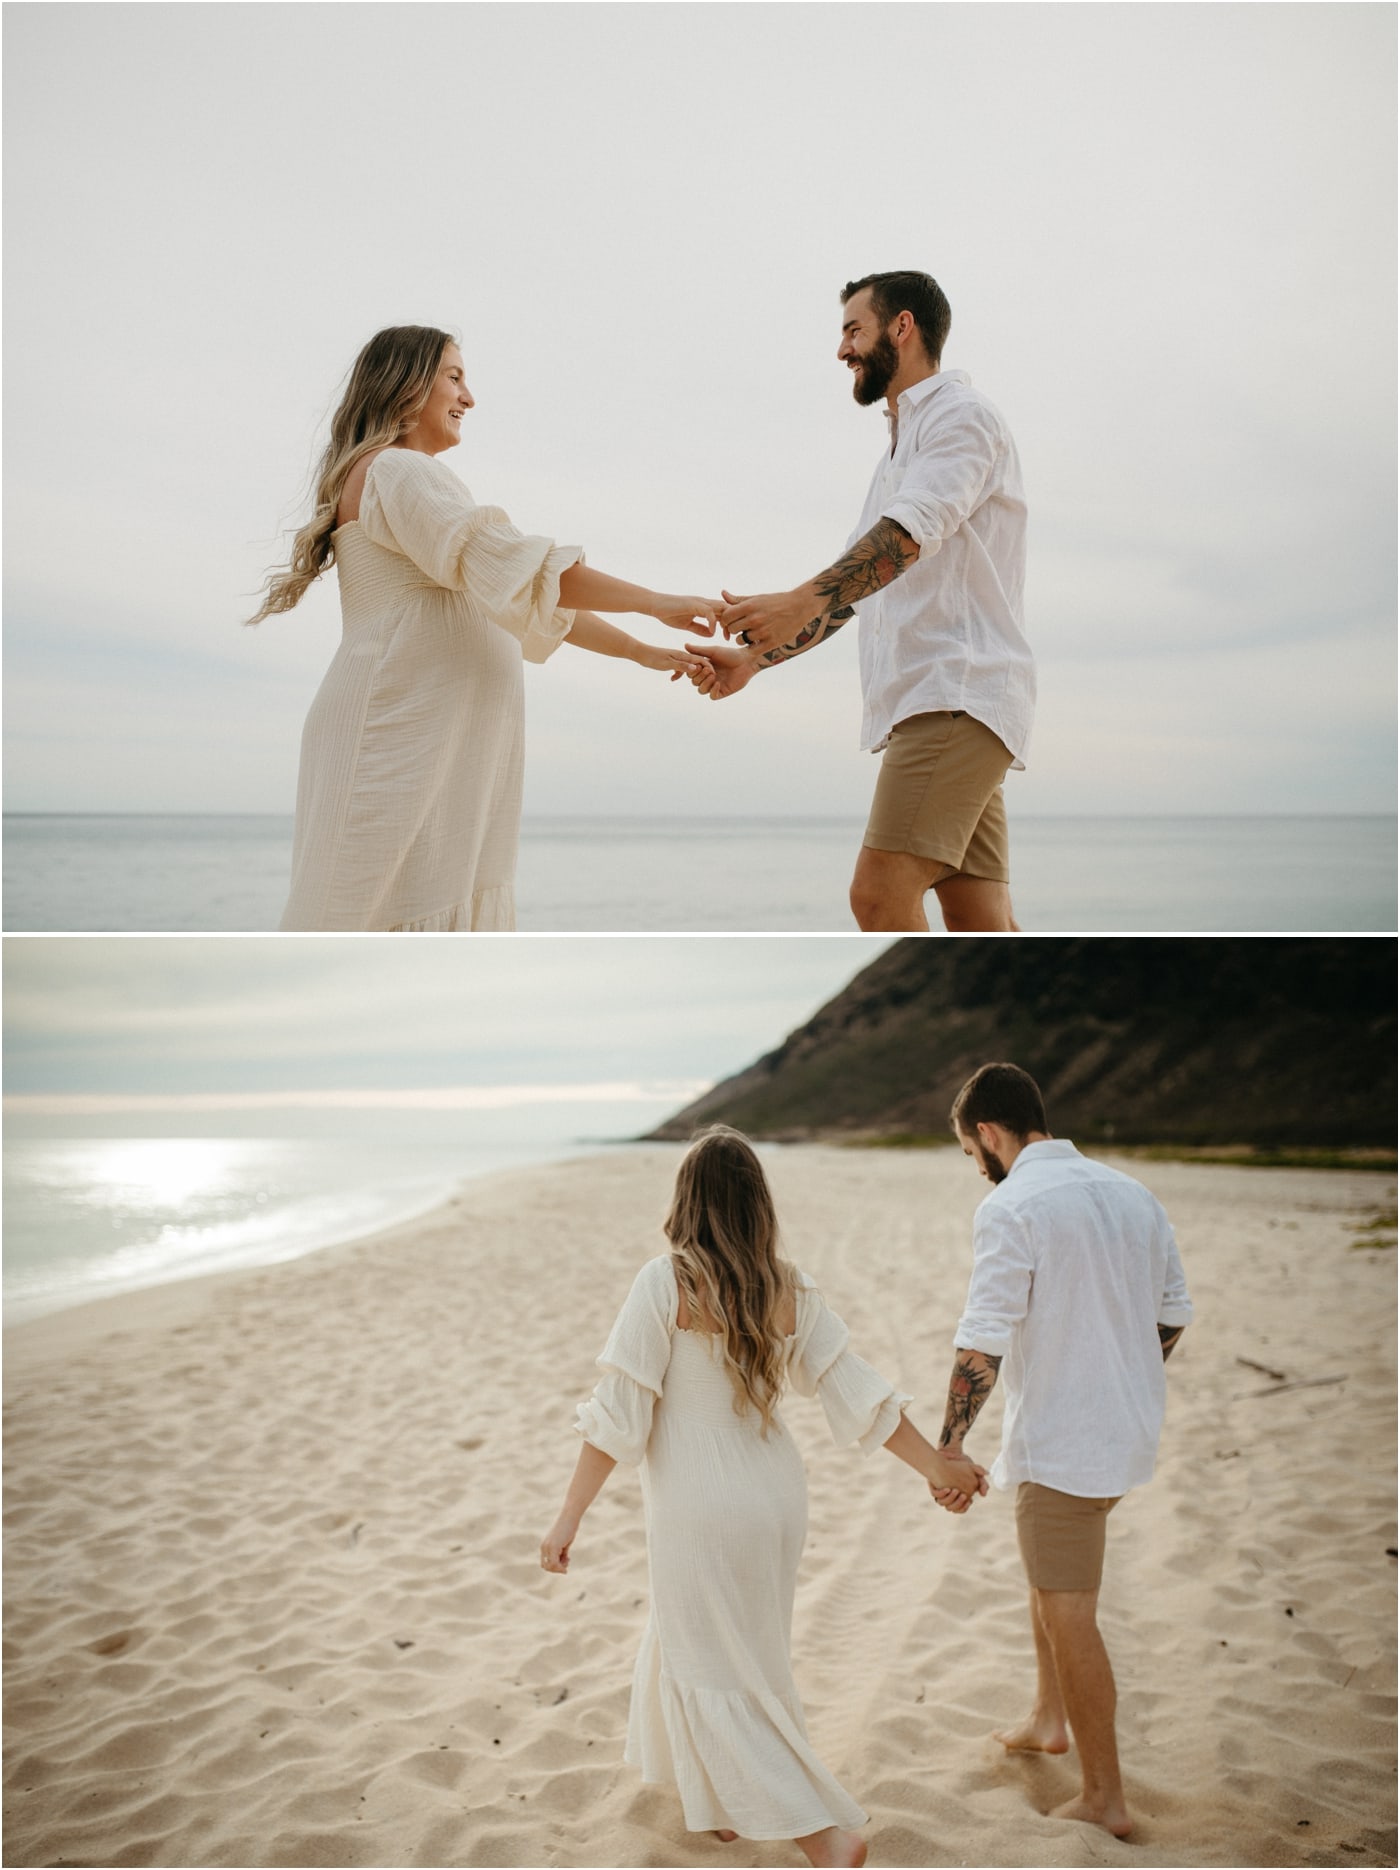 Maternity session on the beach in Oahu